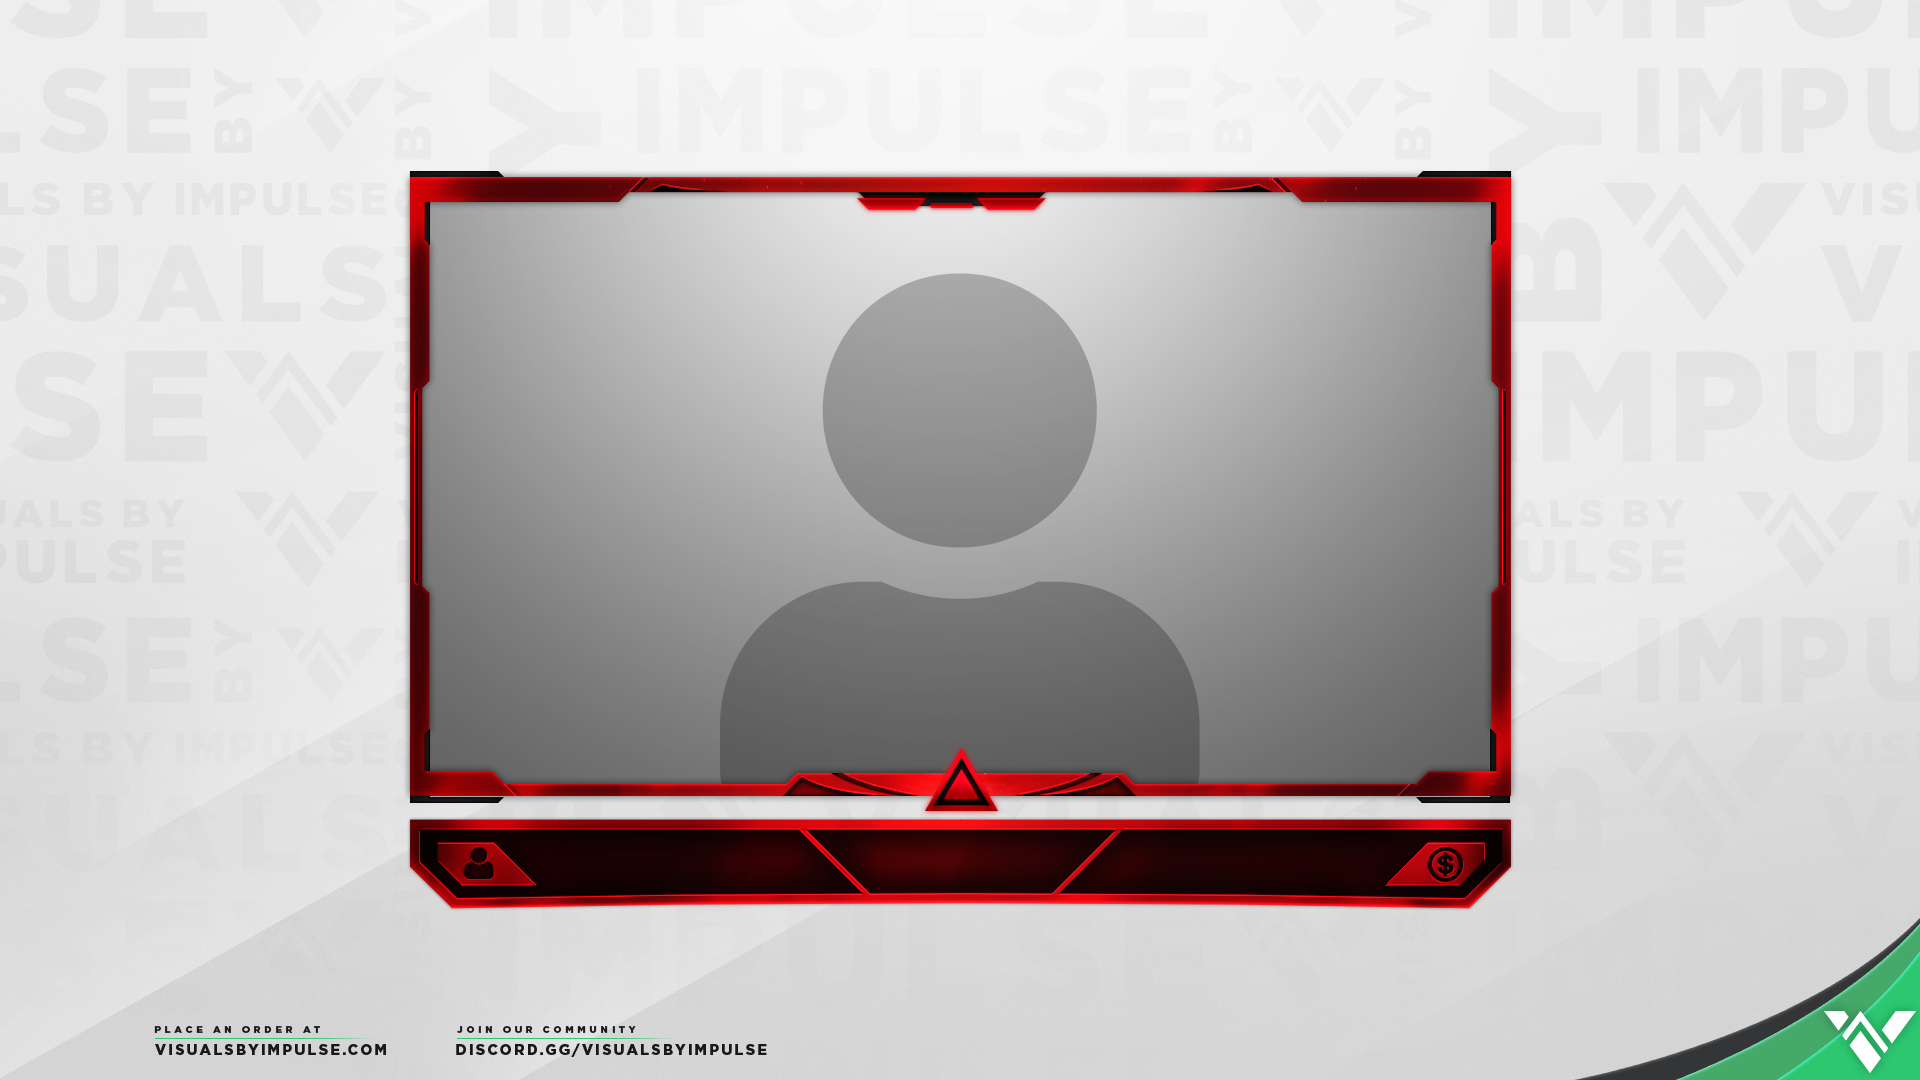 'Prism' Webcam Overlay: FREE Stream Template for Twitch ... - 1920 x 1080 png 1001kB